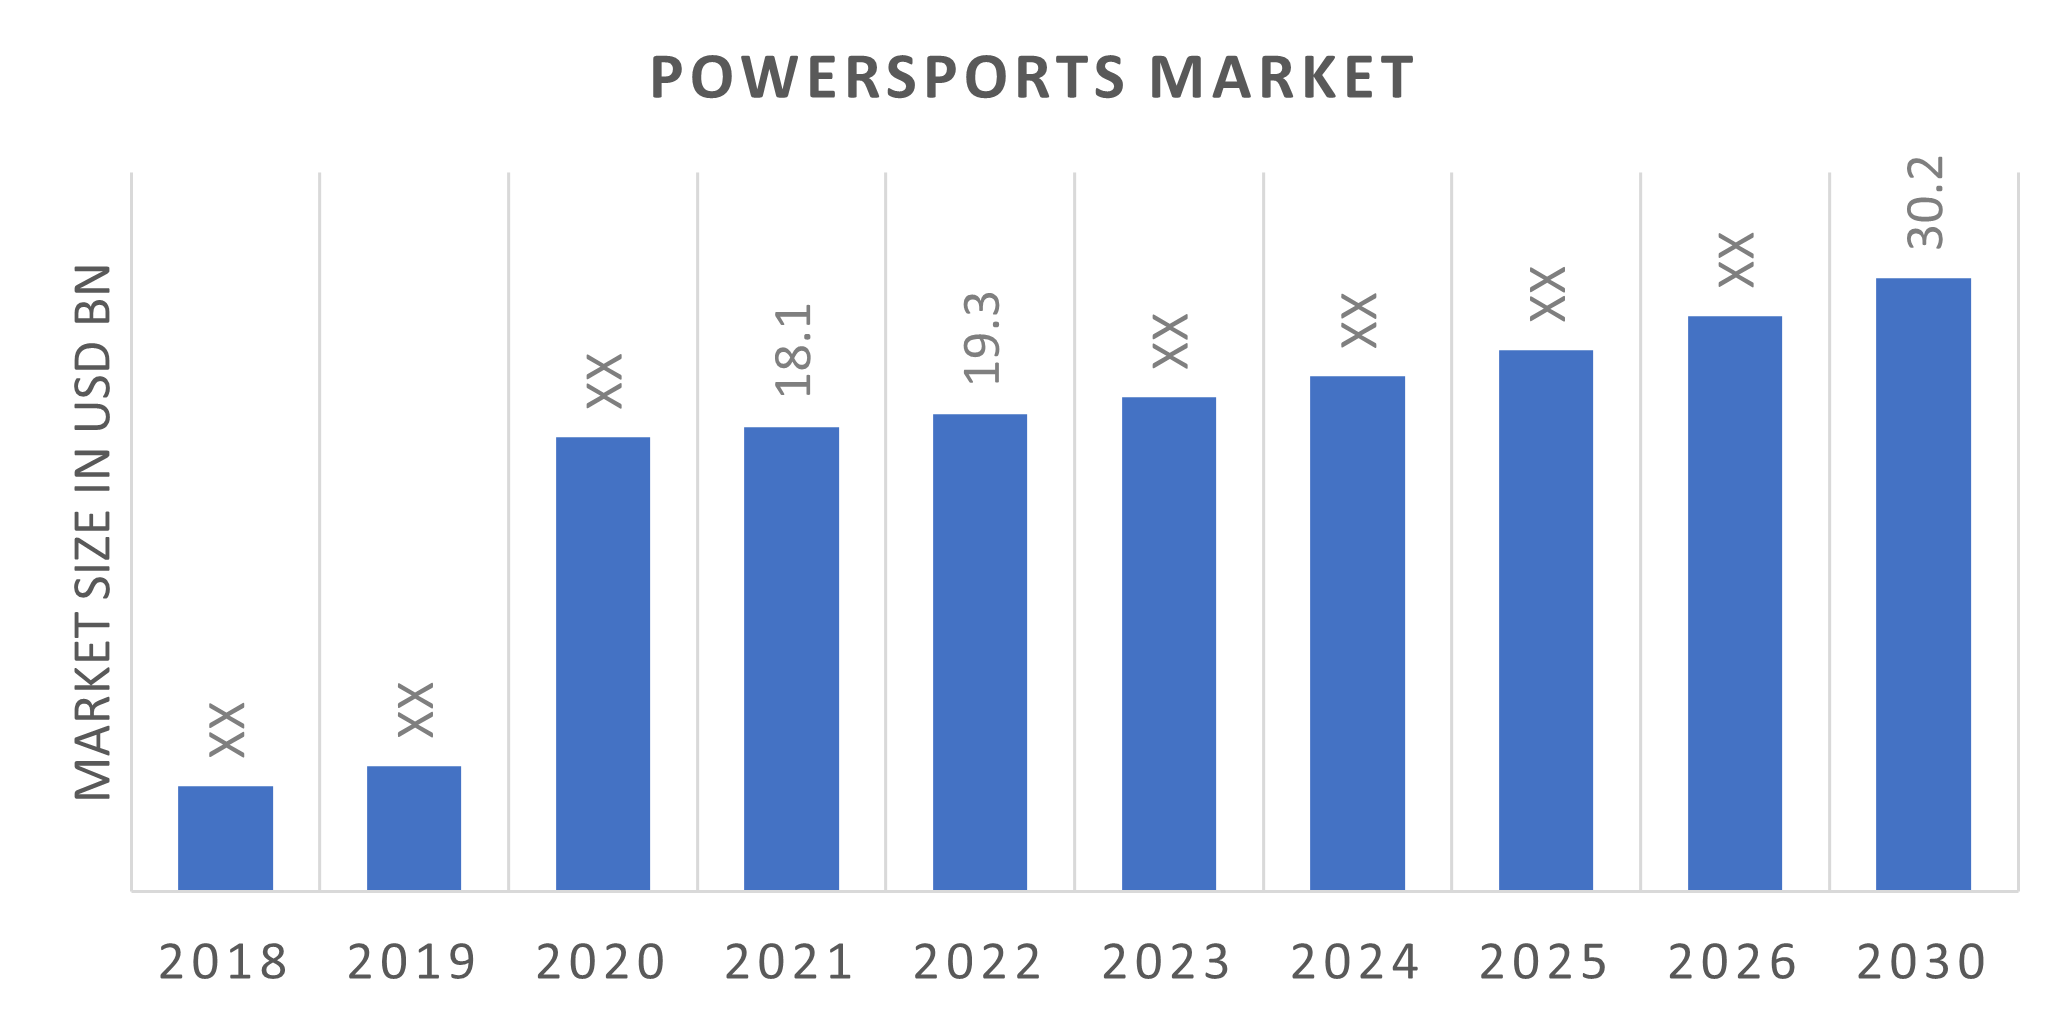 Global Powersports Market Overview